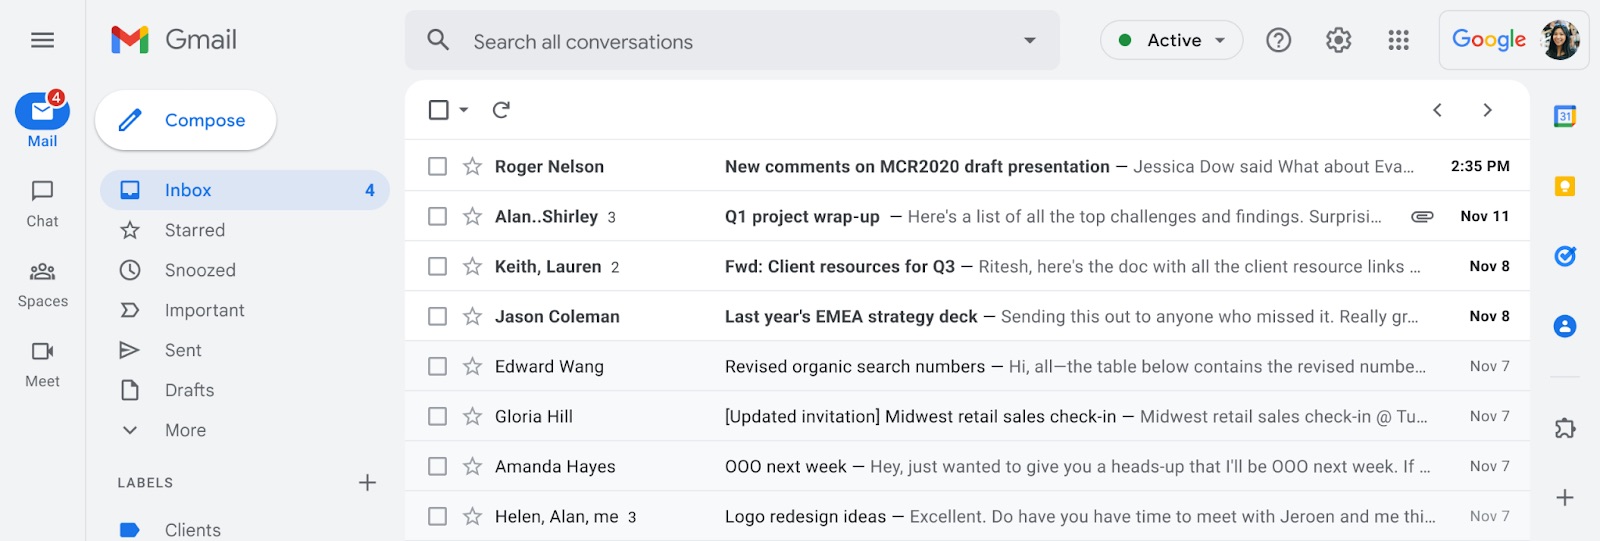 Gmail's New Layout is Rolling out in April 2022